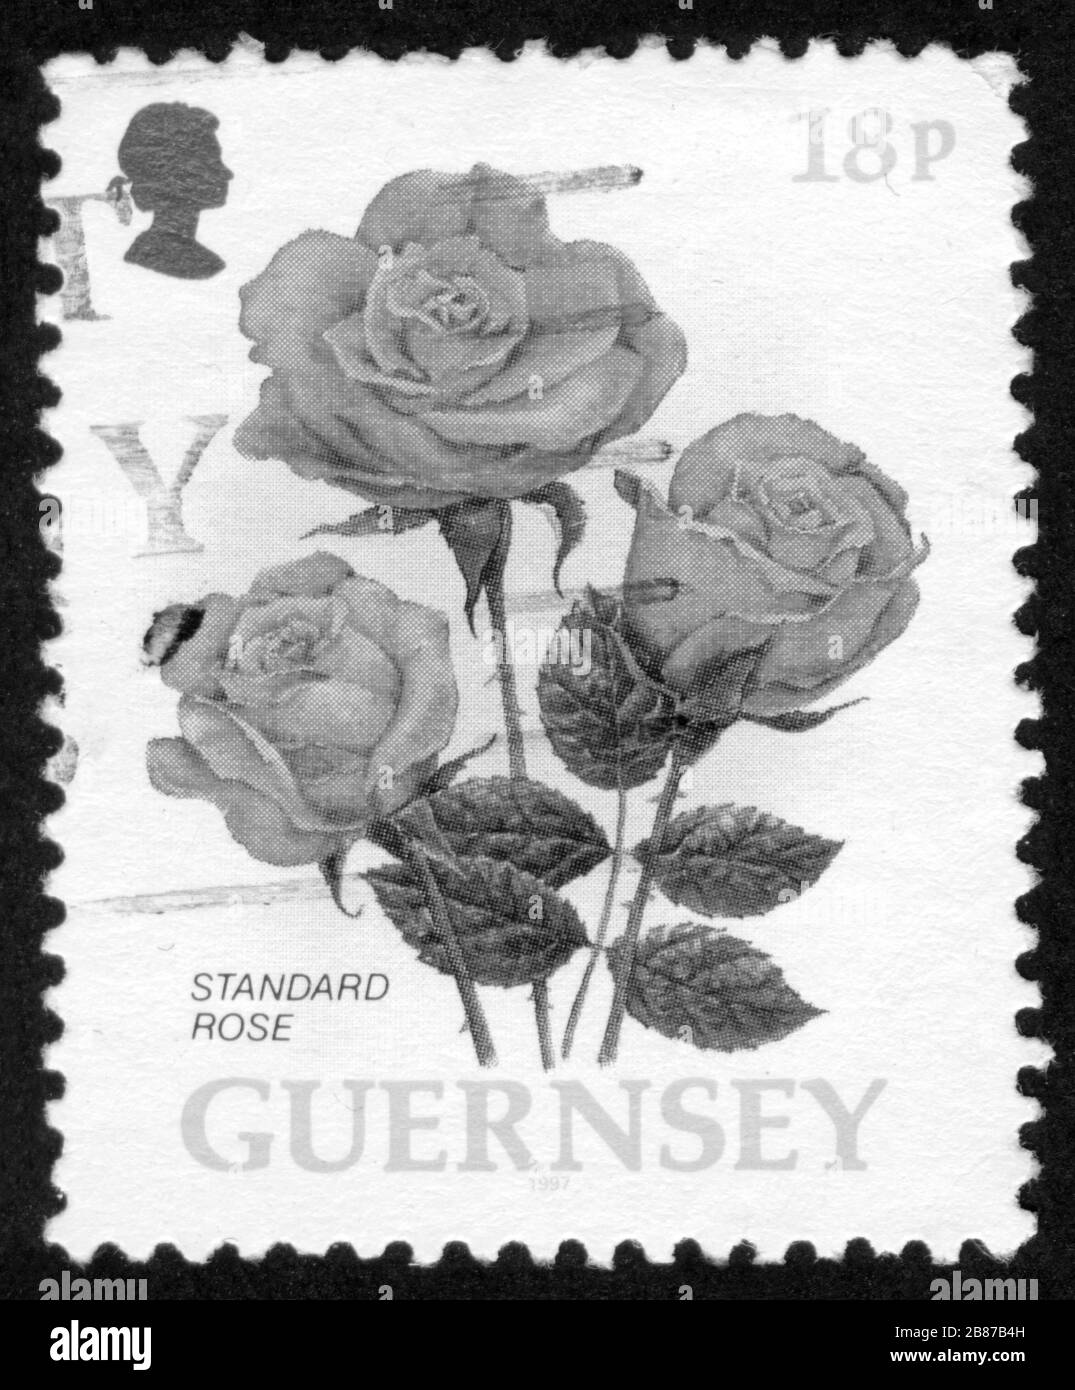 Stamp print in Guernsey,rose,flowers Stock Photo - Alamy